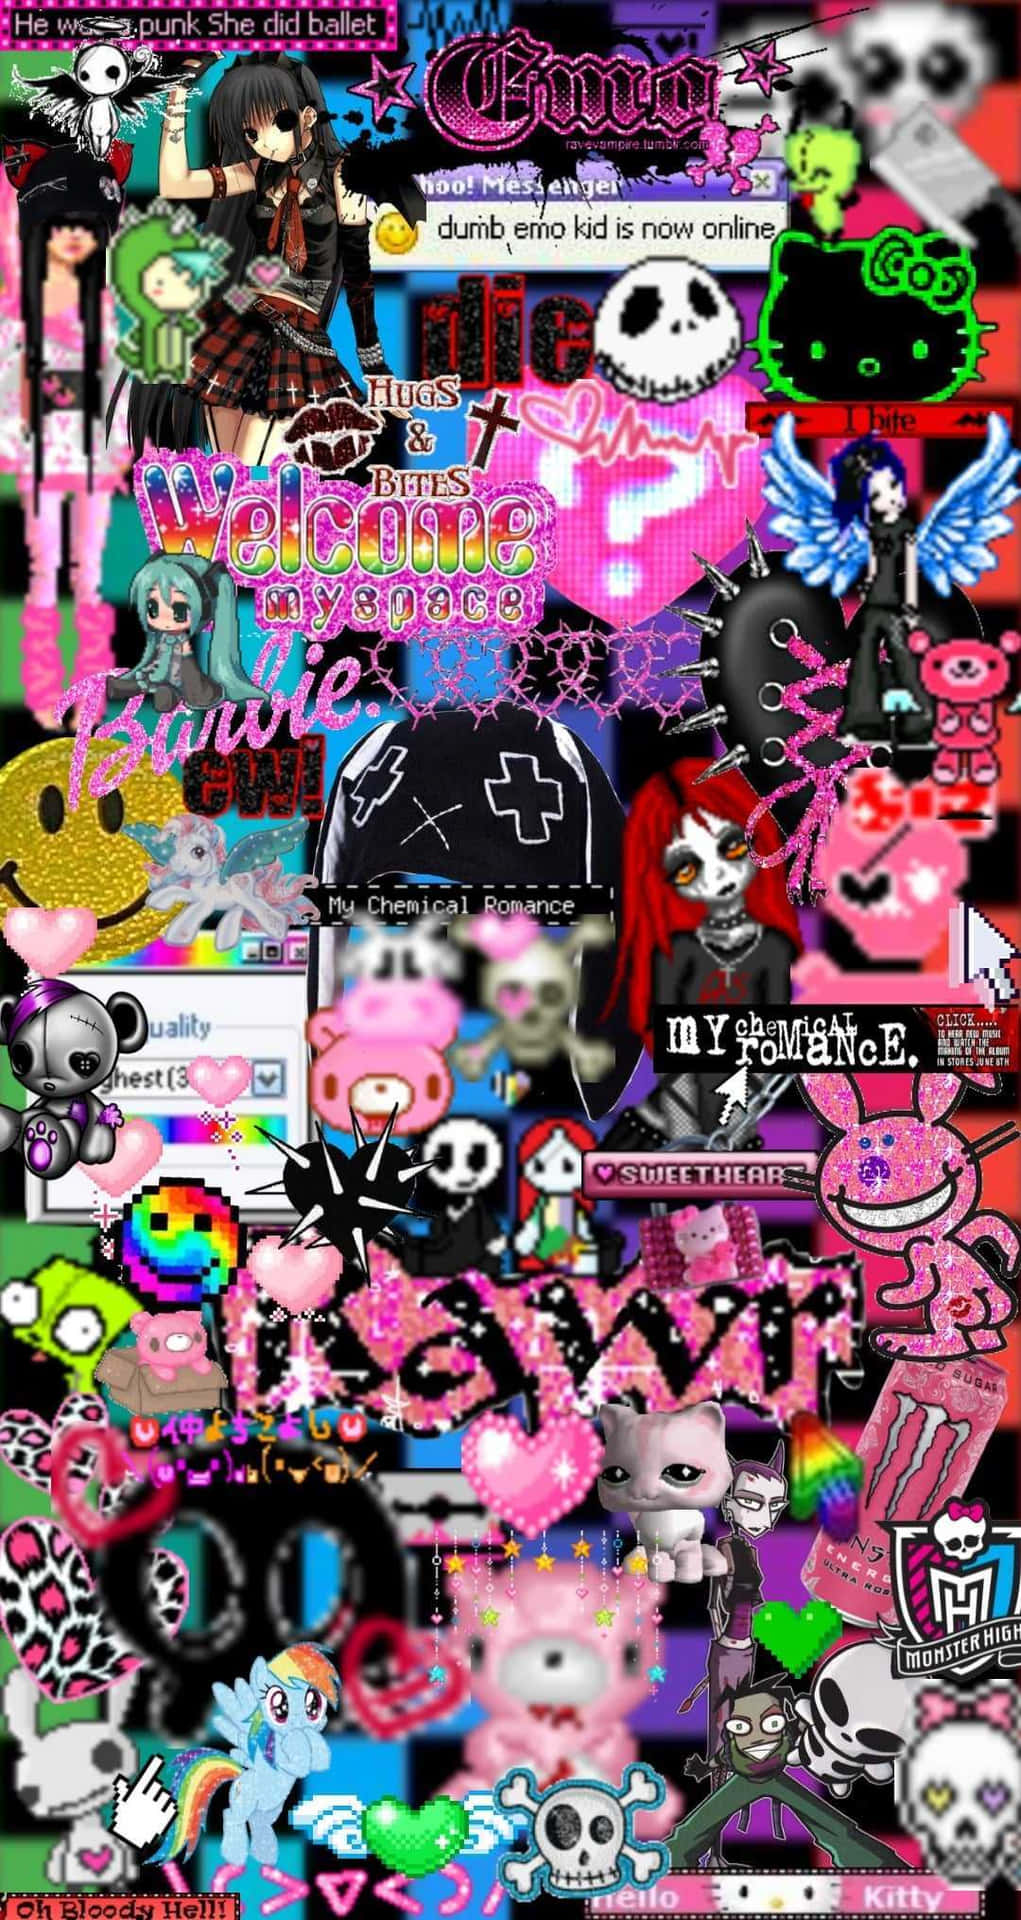 Weirdcore Pfp Of Edgy Style Wallpaper